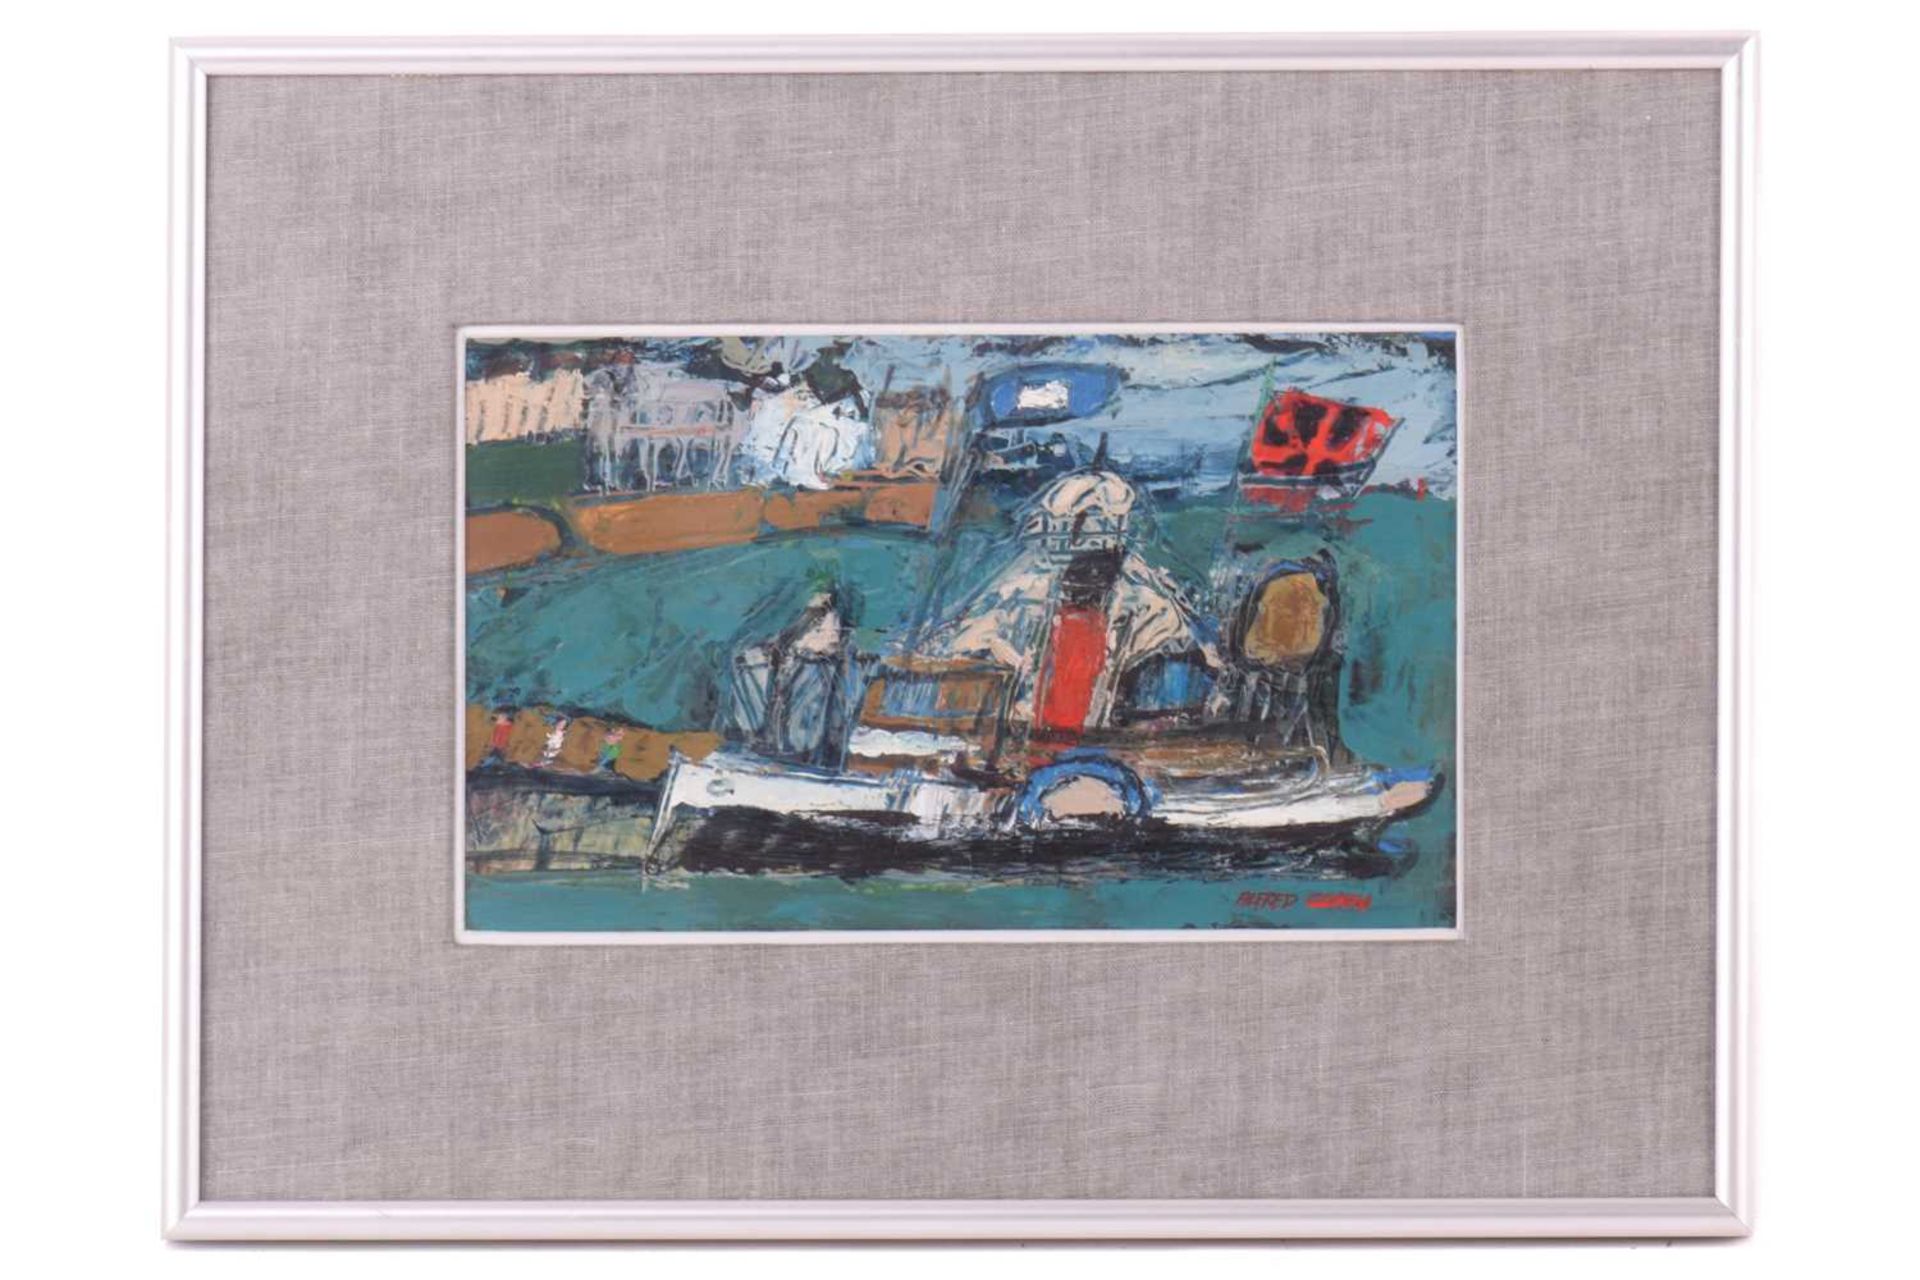 Alfred Cohen (1920 - 2001), Ryde Pier (1967), signed, labelled verso - 'For Brian to celebrate